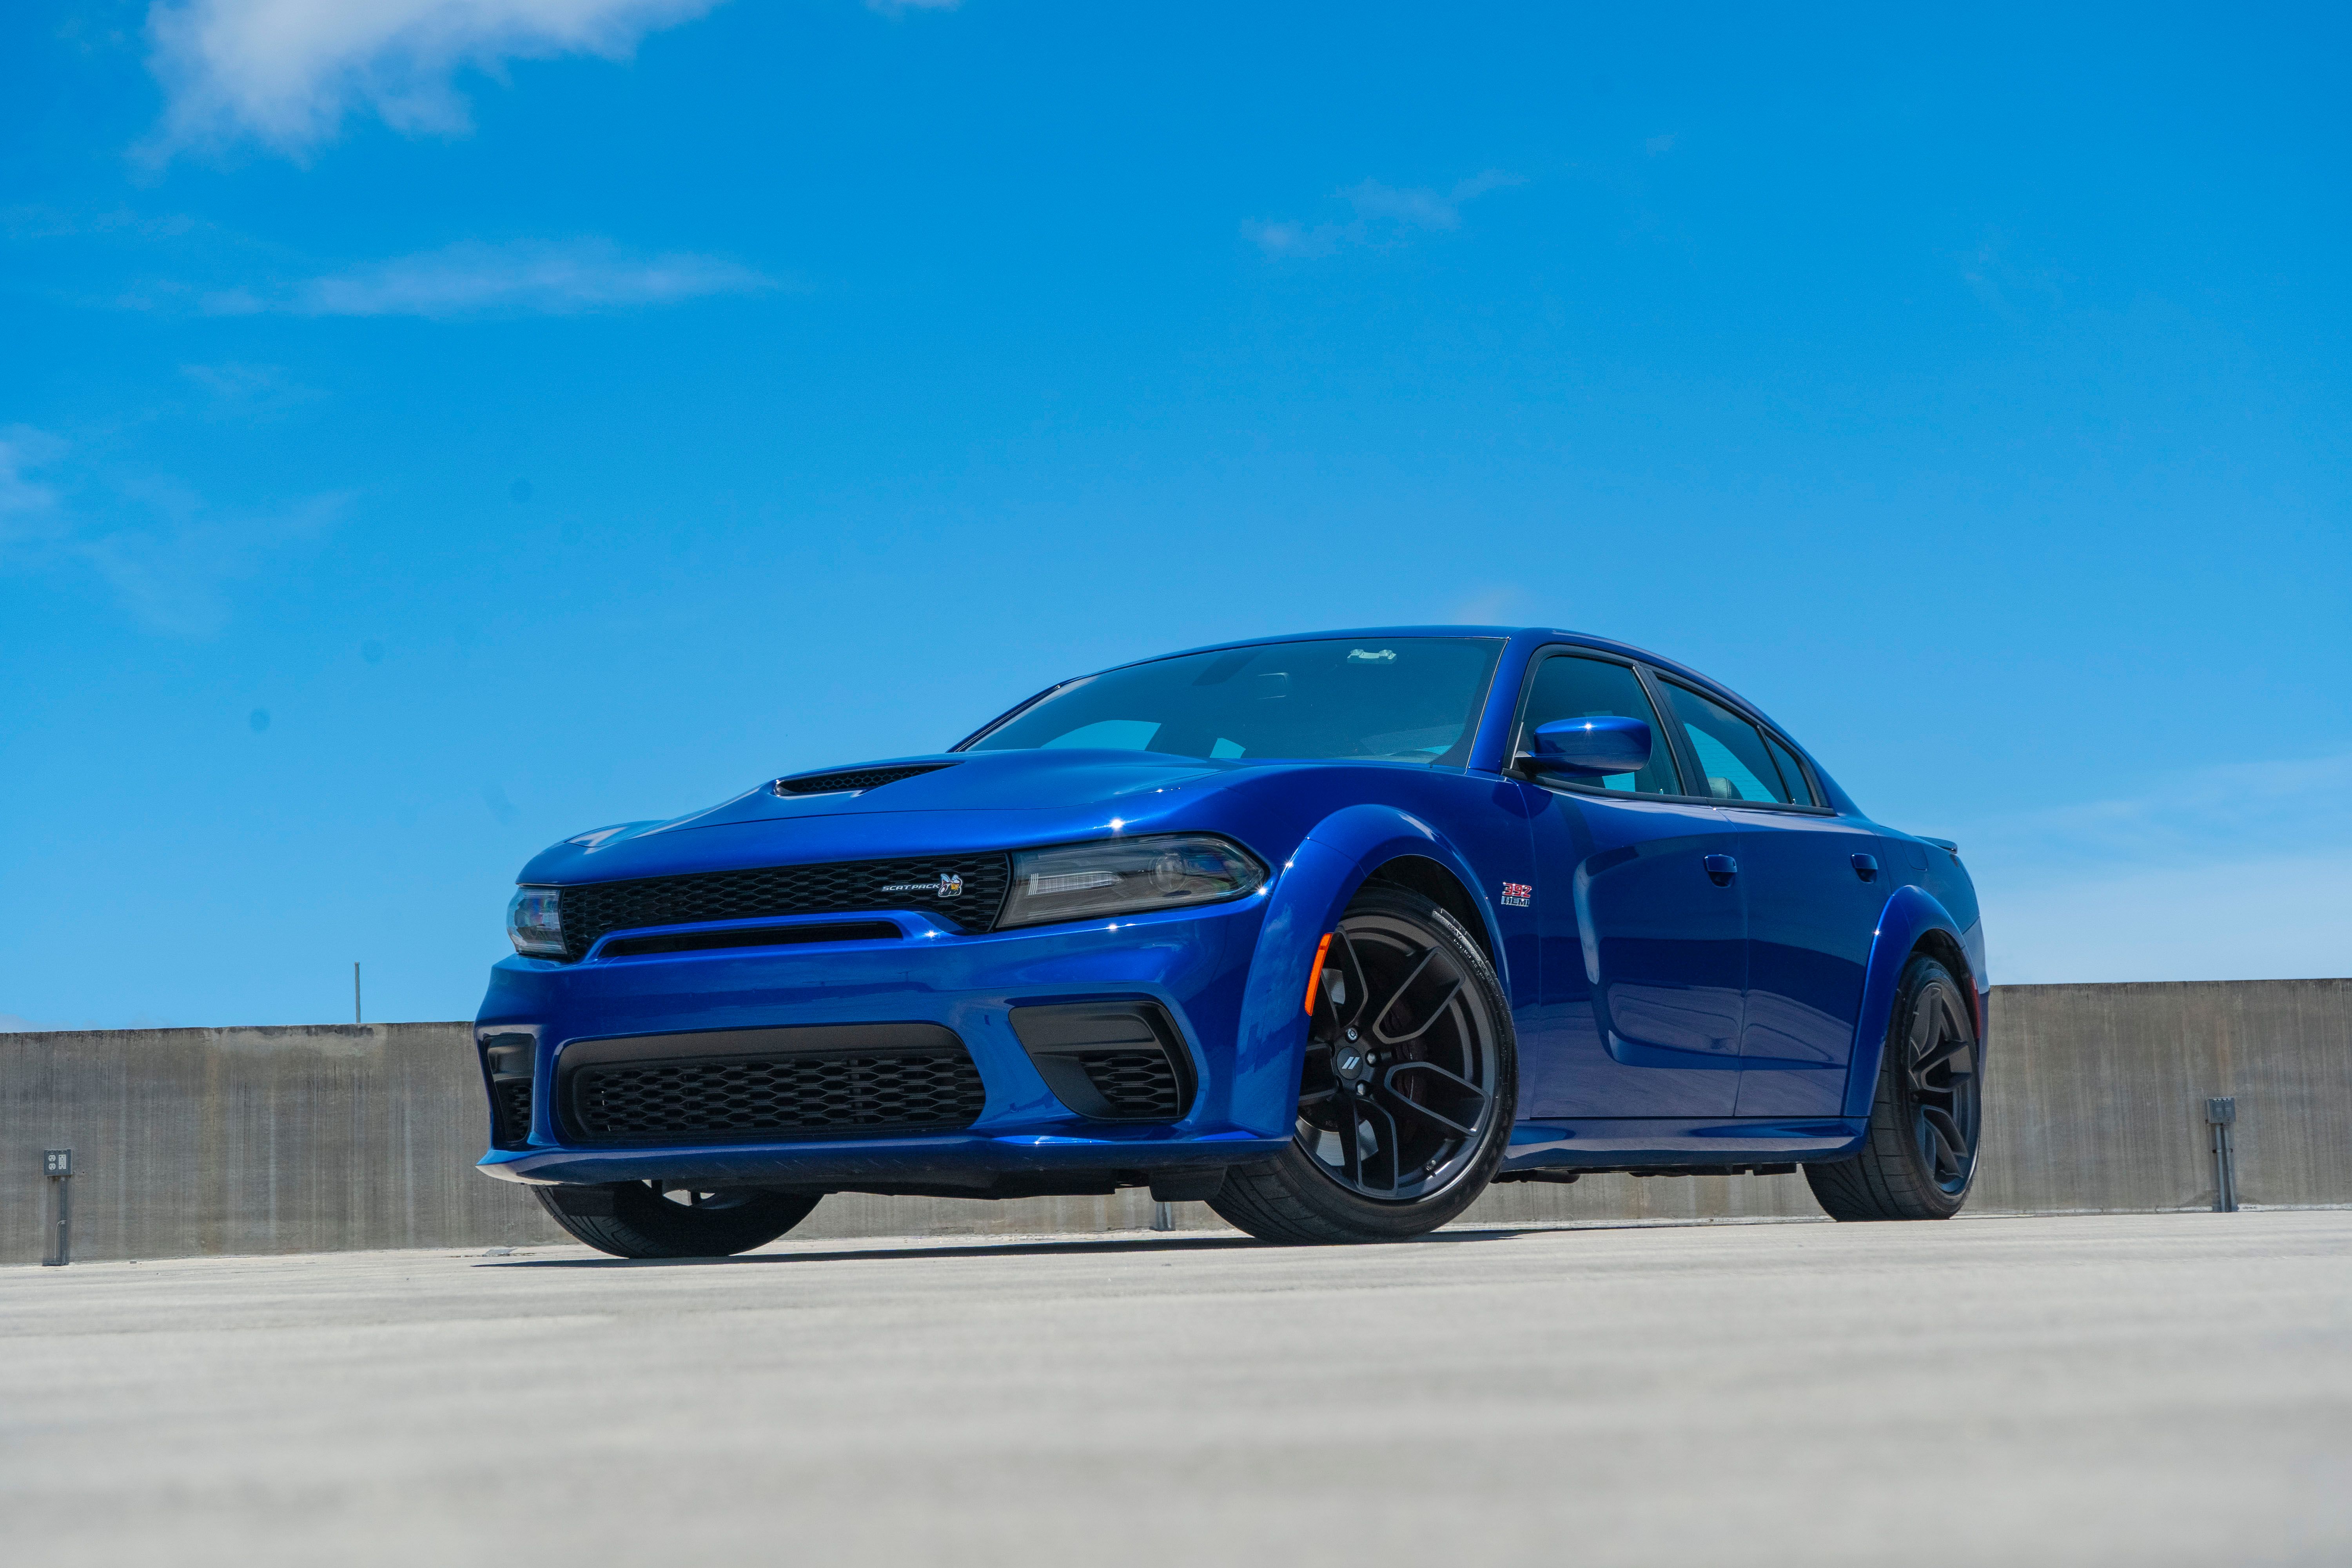 2020 Dodge Charger 392 Scat Pack Widebody Driven